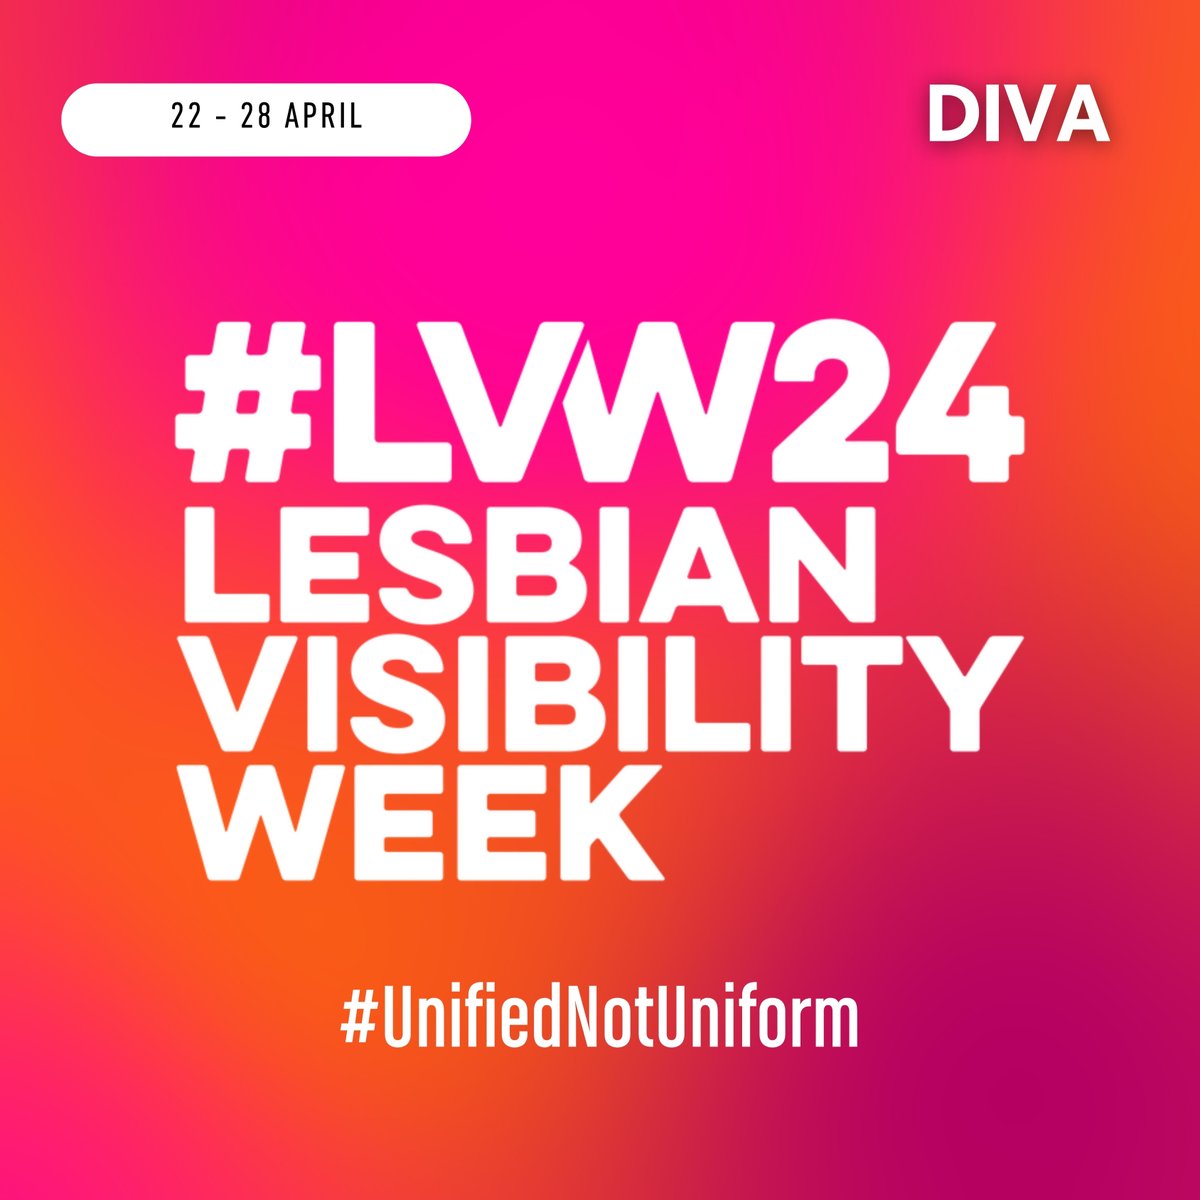 Happy #LesbianVisibilityWeek! This year we're celebrating our beautiful, powerful community with the #UnifiedNotUniform 🌈